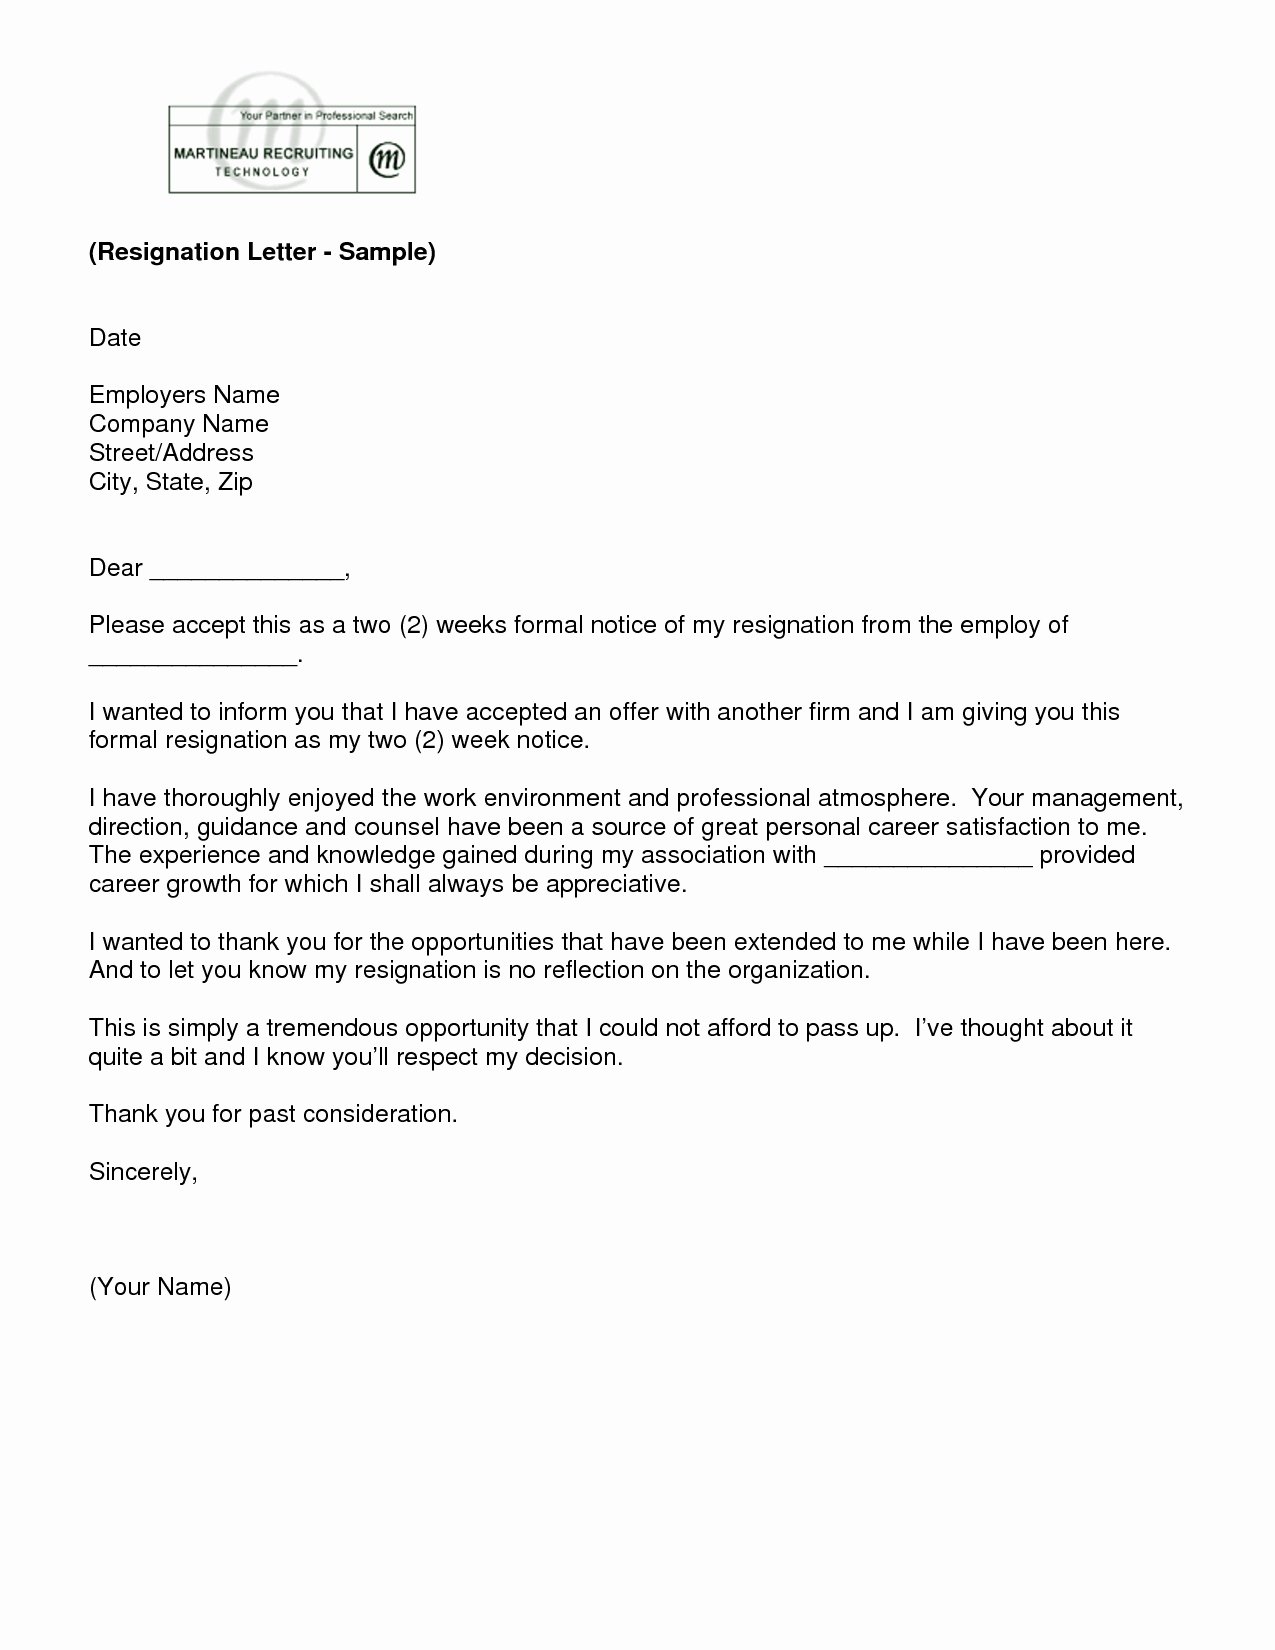 How to Write A Resignation Letter 2 Weeks Noticewritings